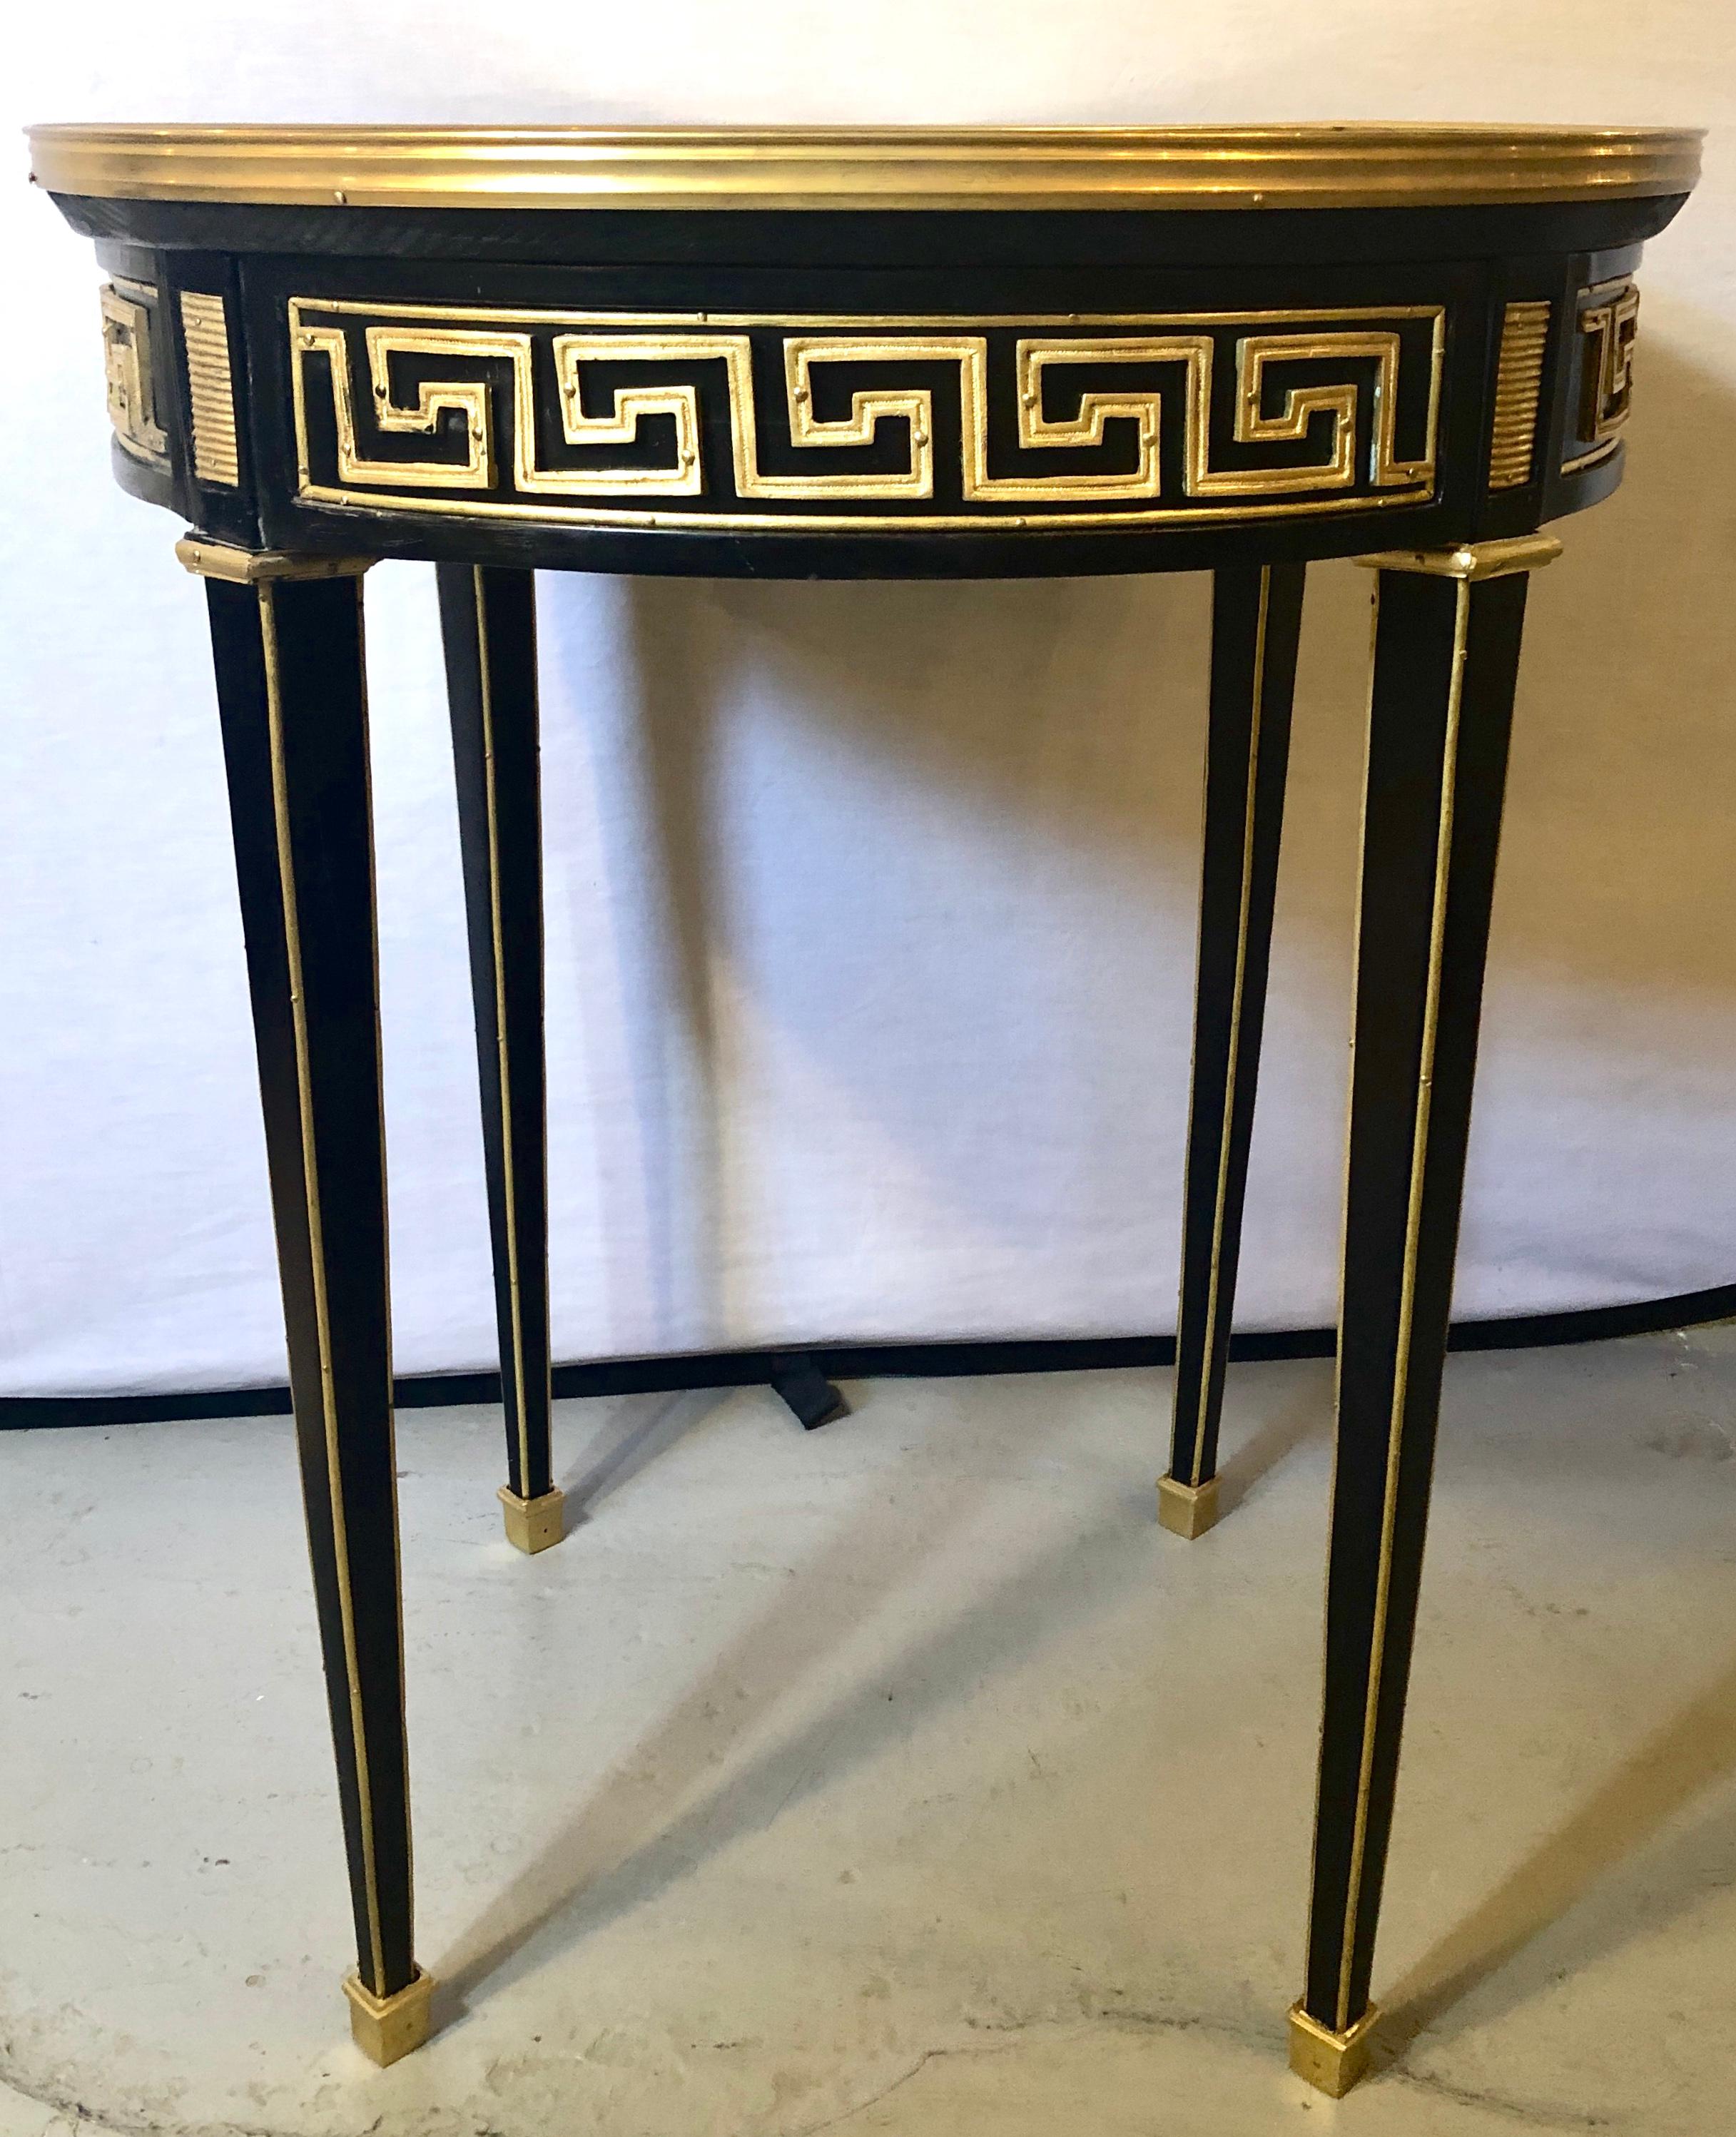 Pair of Greek key designed bronze galleried marble top ebony Bouillotte or pedestal tables. These are simply the most stunning pair of Hollywood Regency style end tables or pedestals on the market. The tapering legs having bronze sabots with bronze